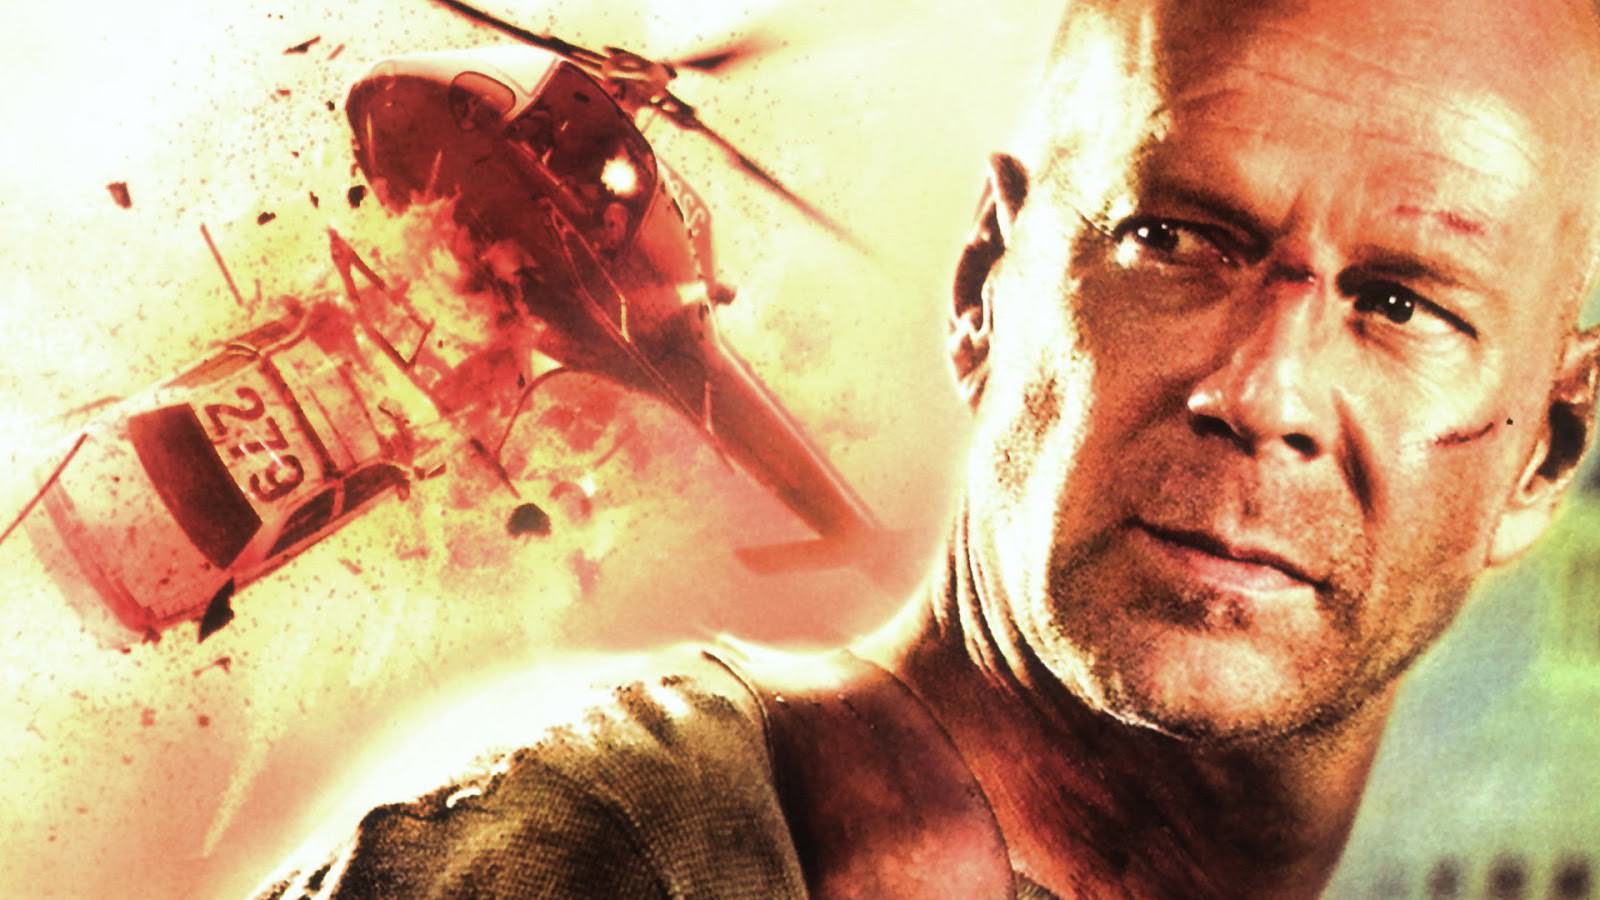 Die Hard Prequel – Has The Franchise Finally Jumped The Shark?